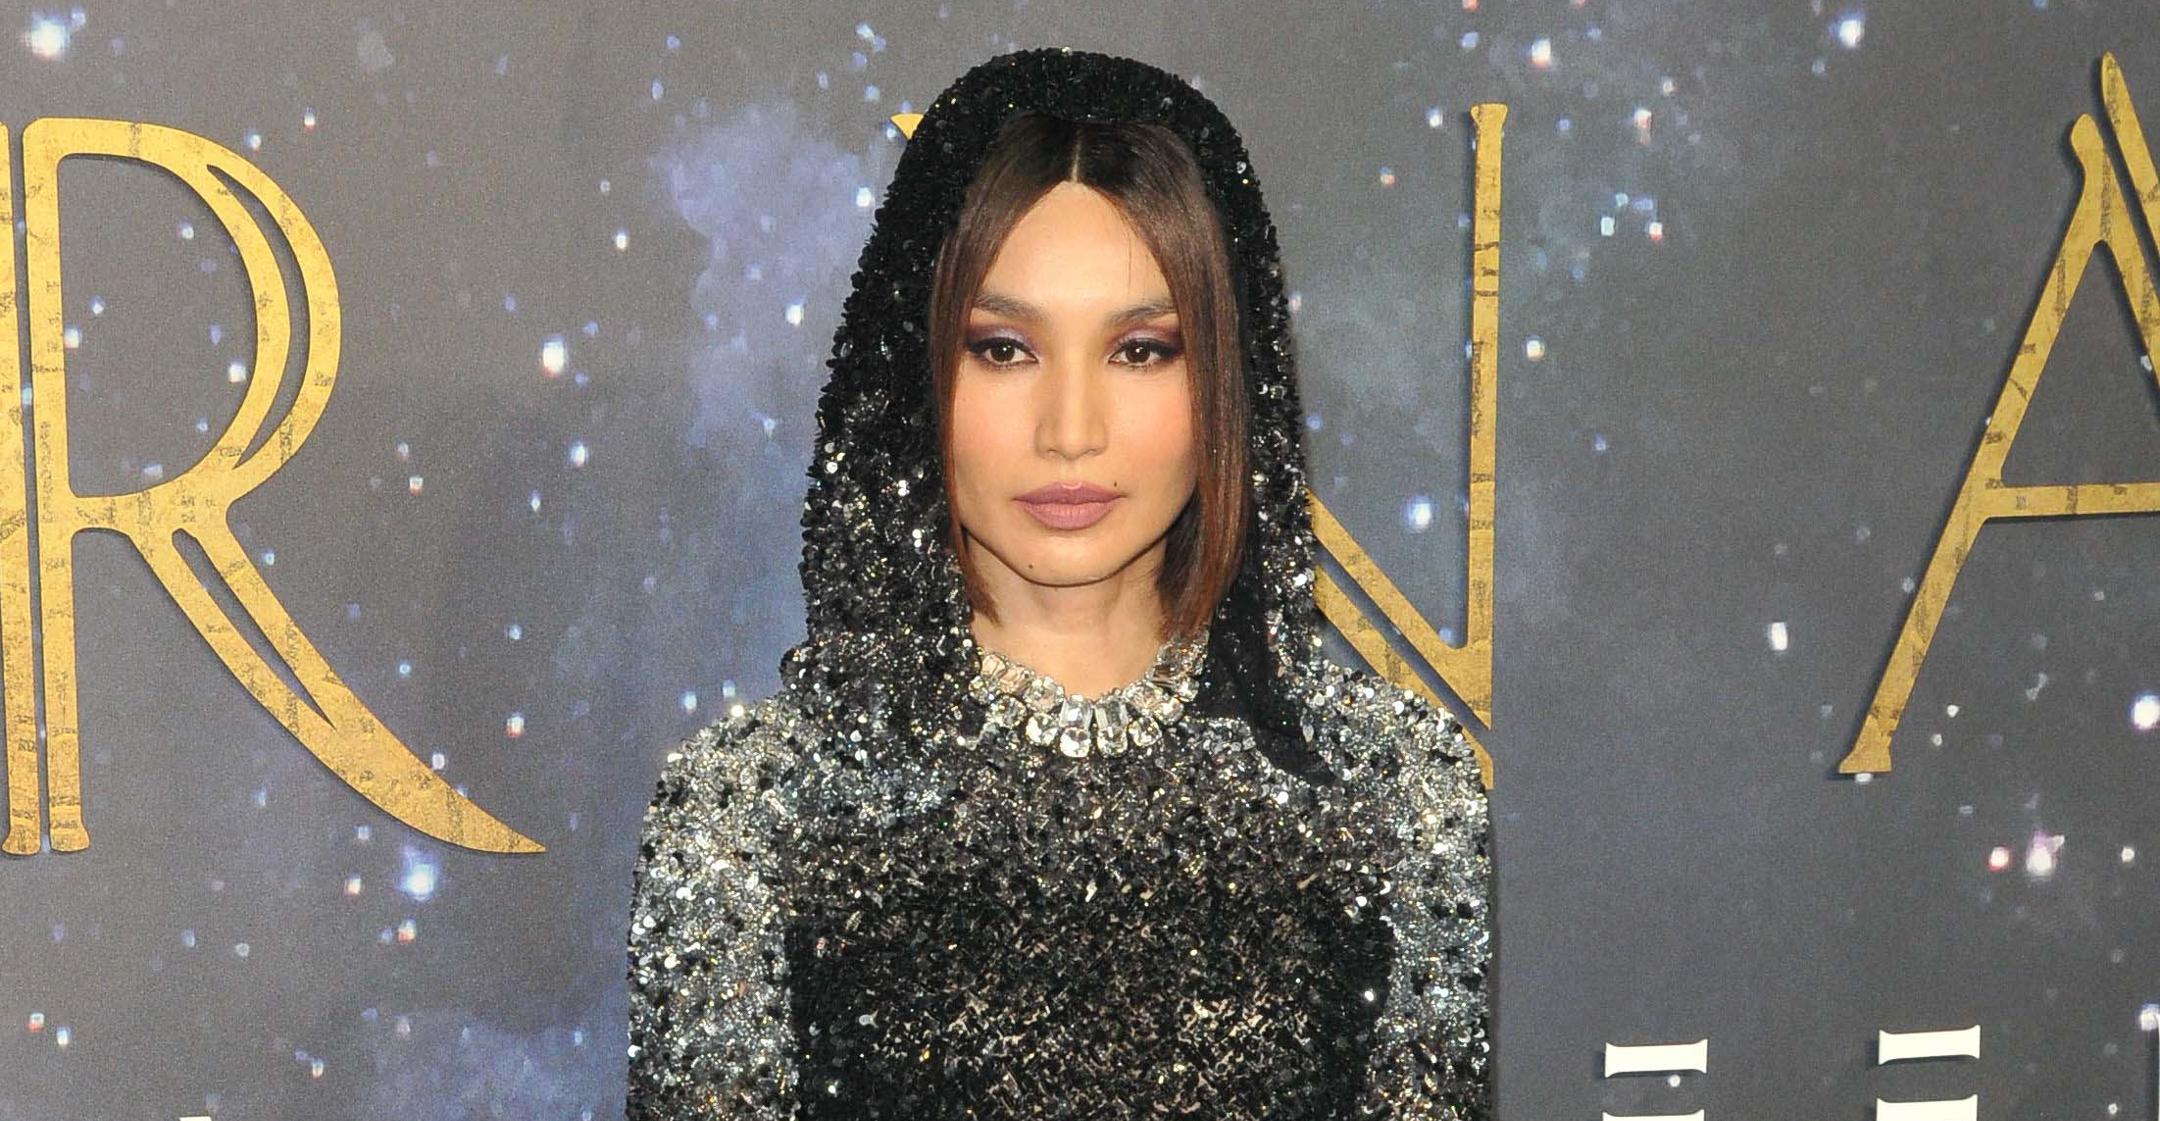 after trying to assimilate gemma chan happy to embrace asian side of heritage